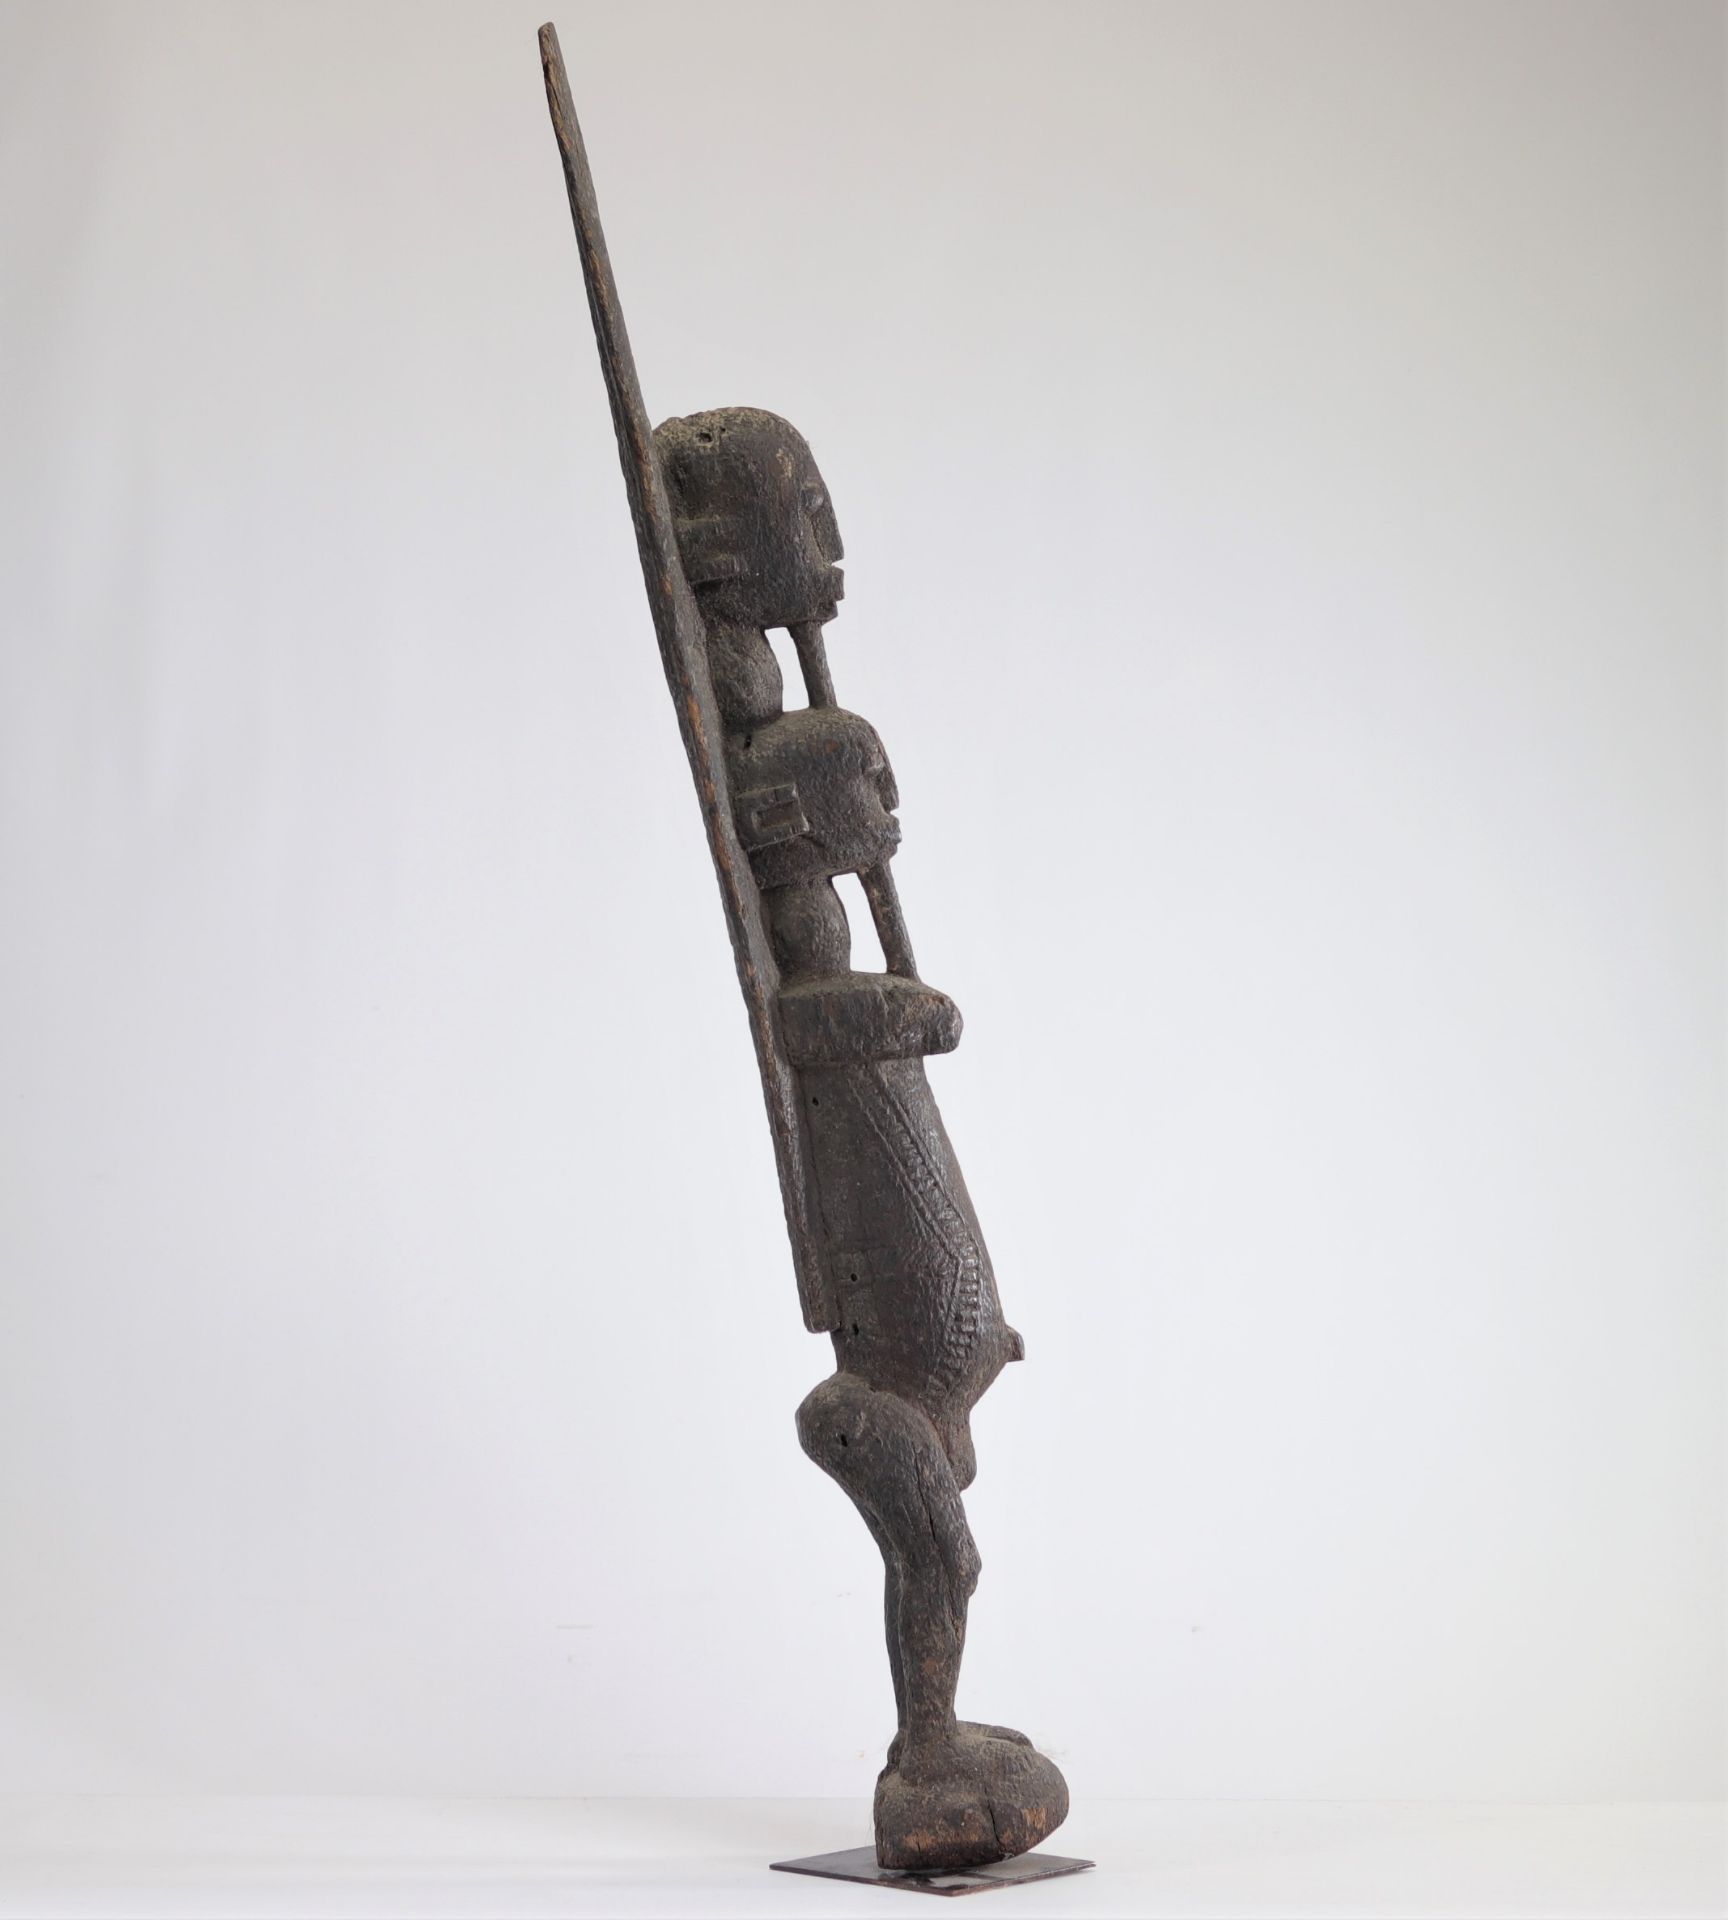 Wooden statue with crusty patina from the Dogon country, Mali - Image 2 of 4